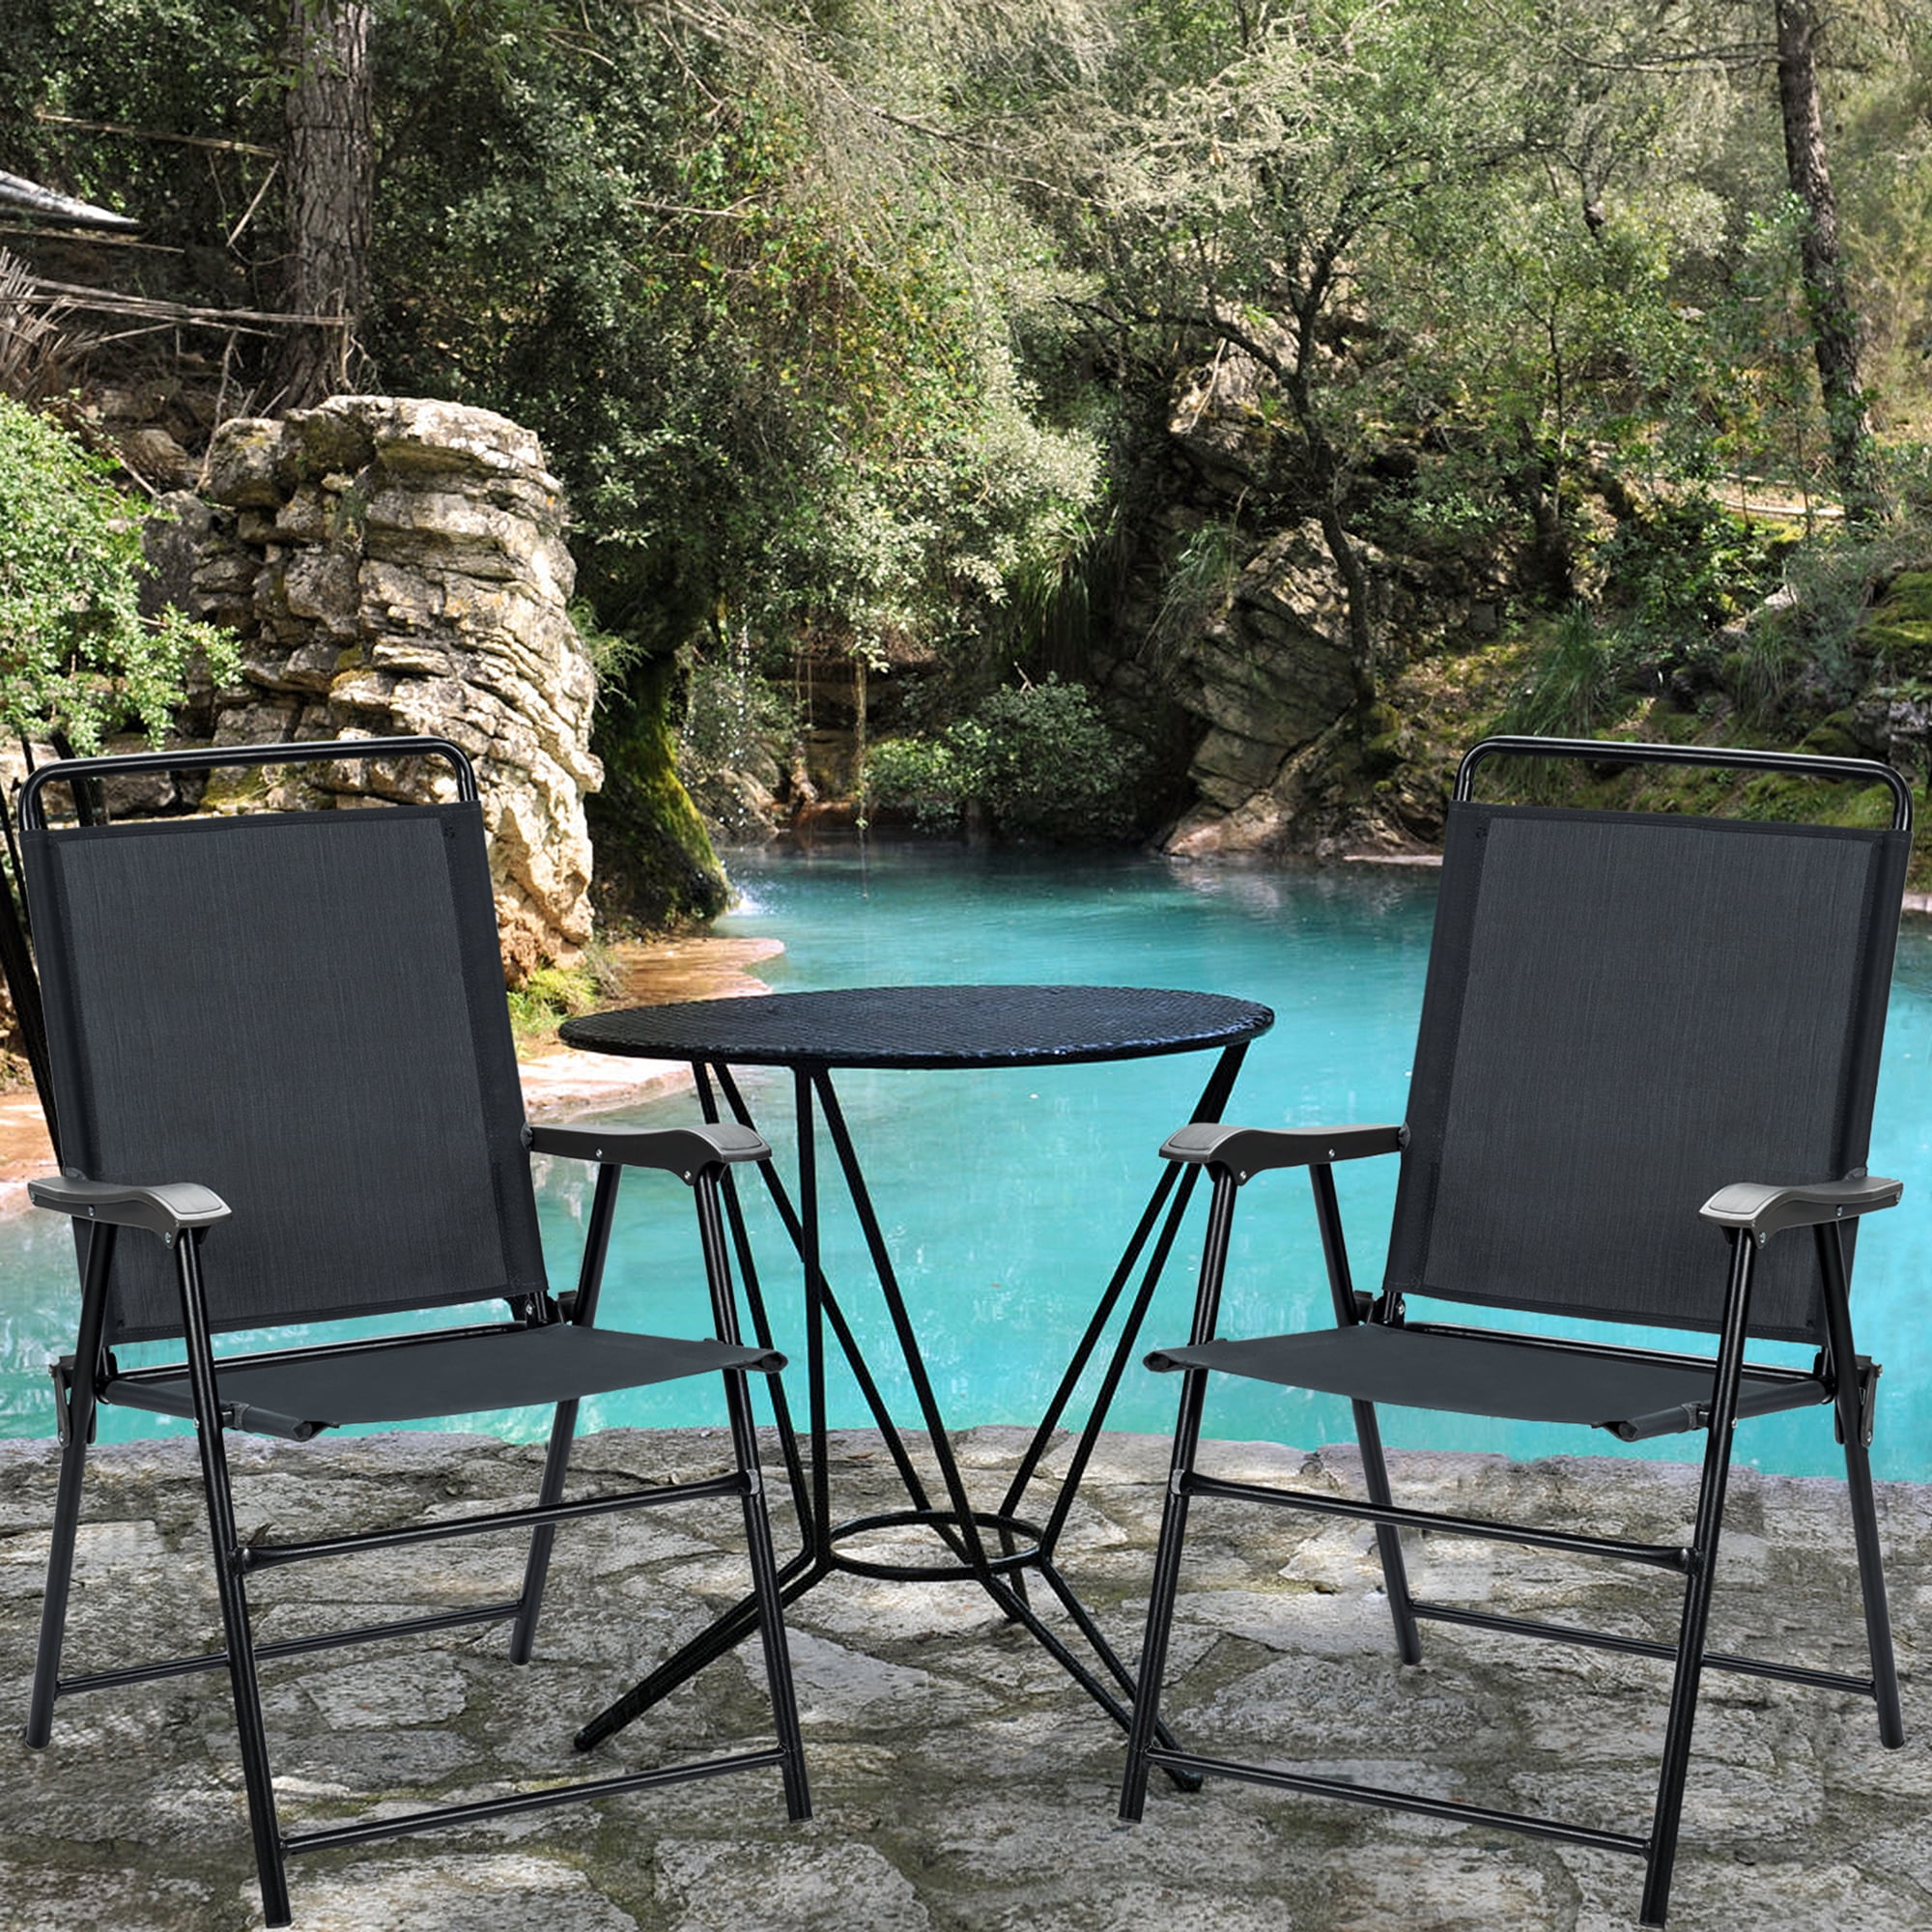 Gymax Set of 4 Folding Patio Chair Portable Sling Chair Yard Garden Outdoor - image 4 of 10